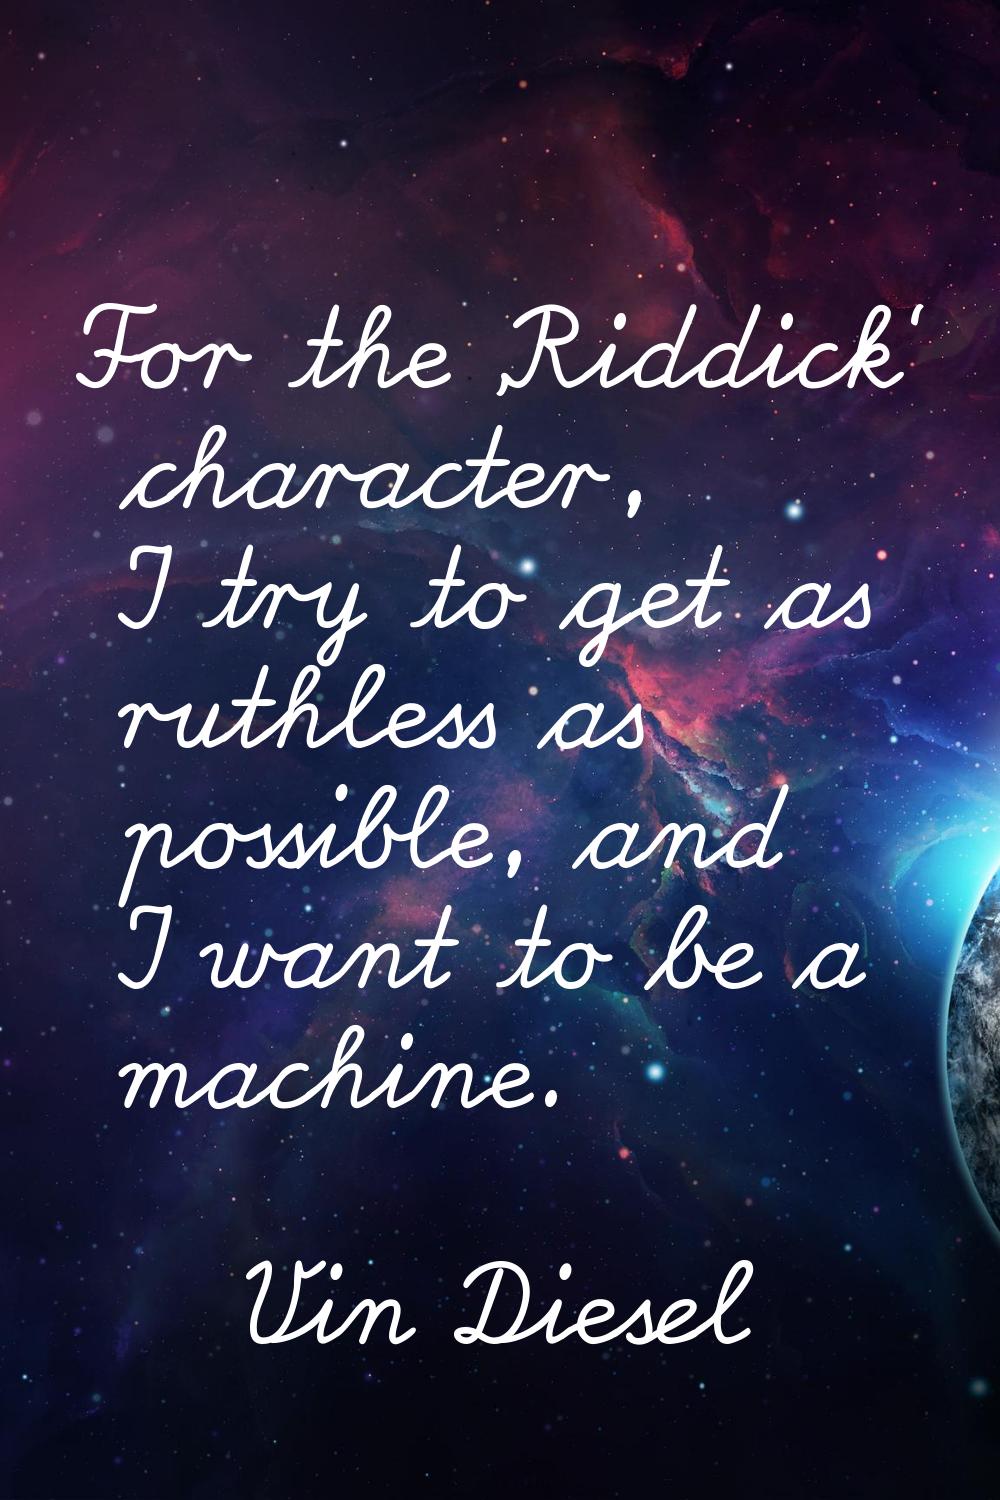 For the 'Riddick' character, I try to get as ruthless as possible, and I want to be a machine.